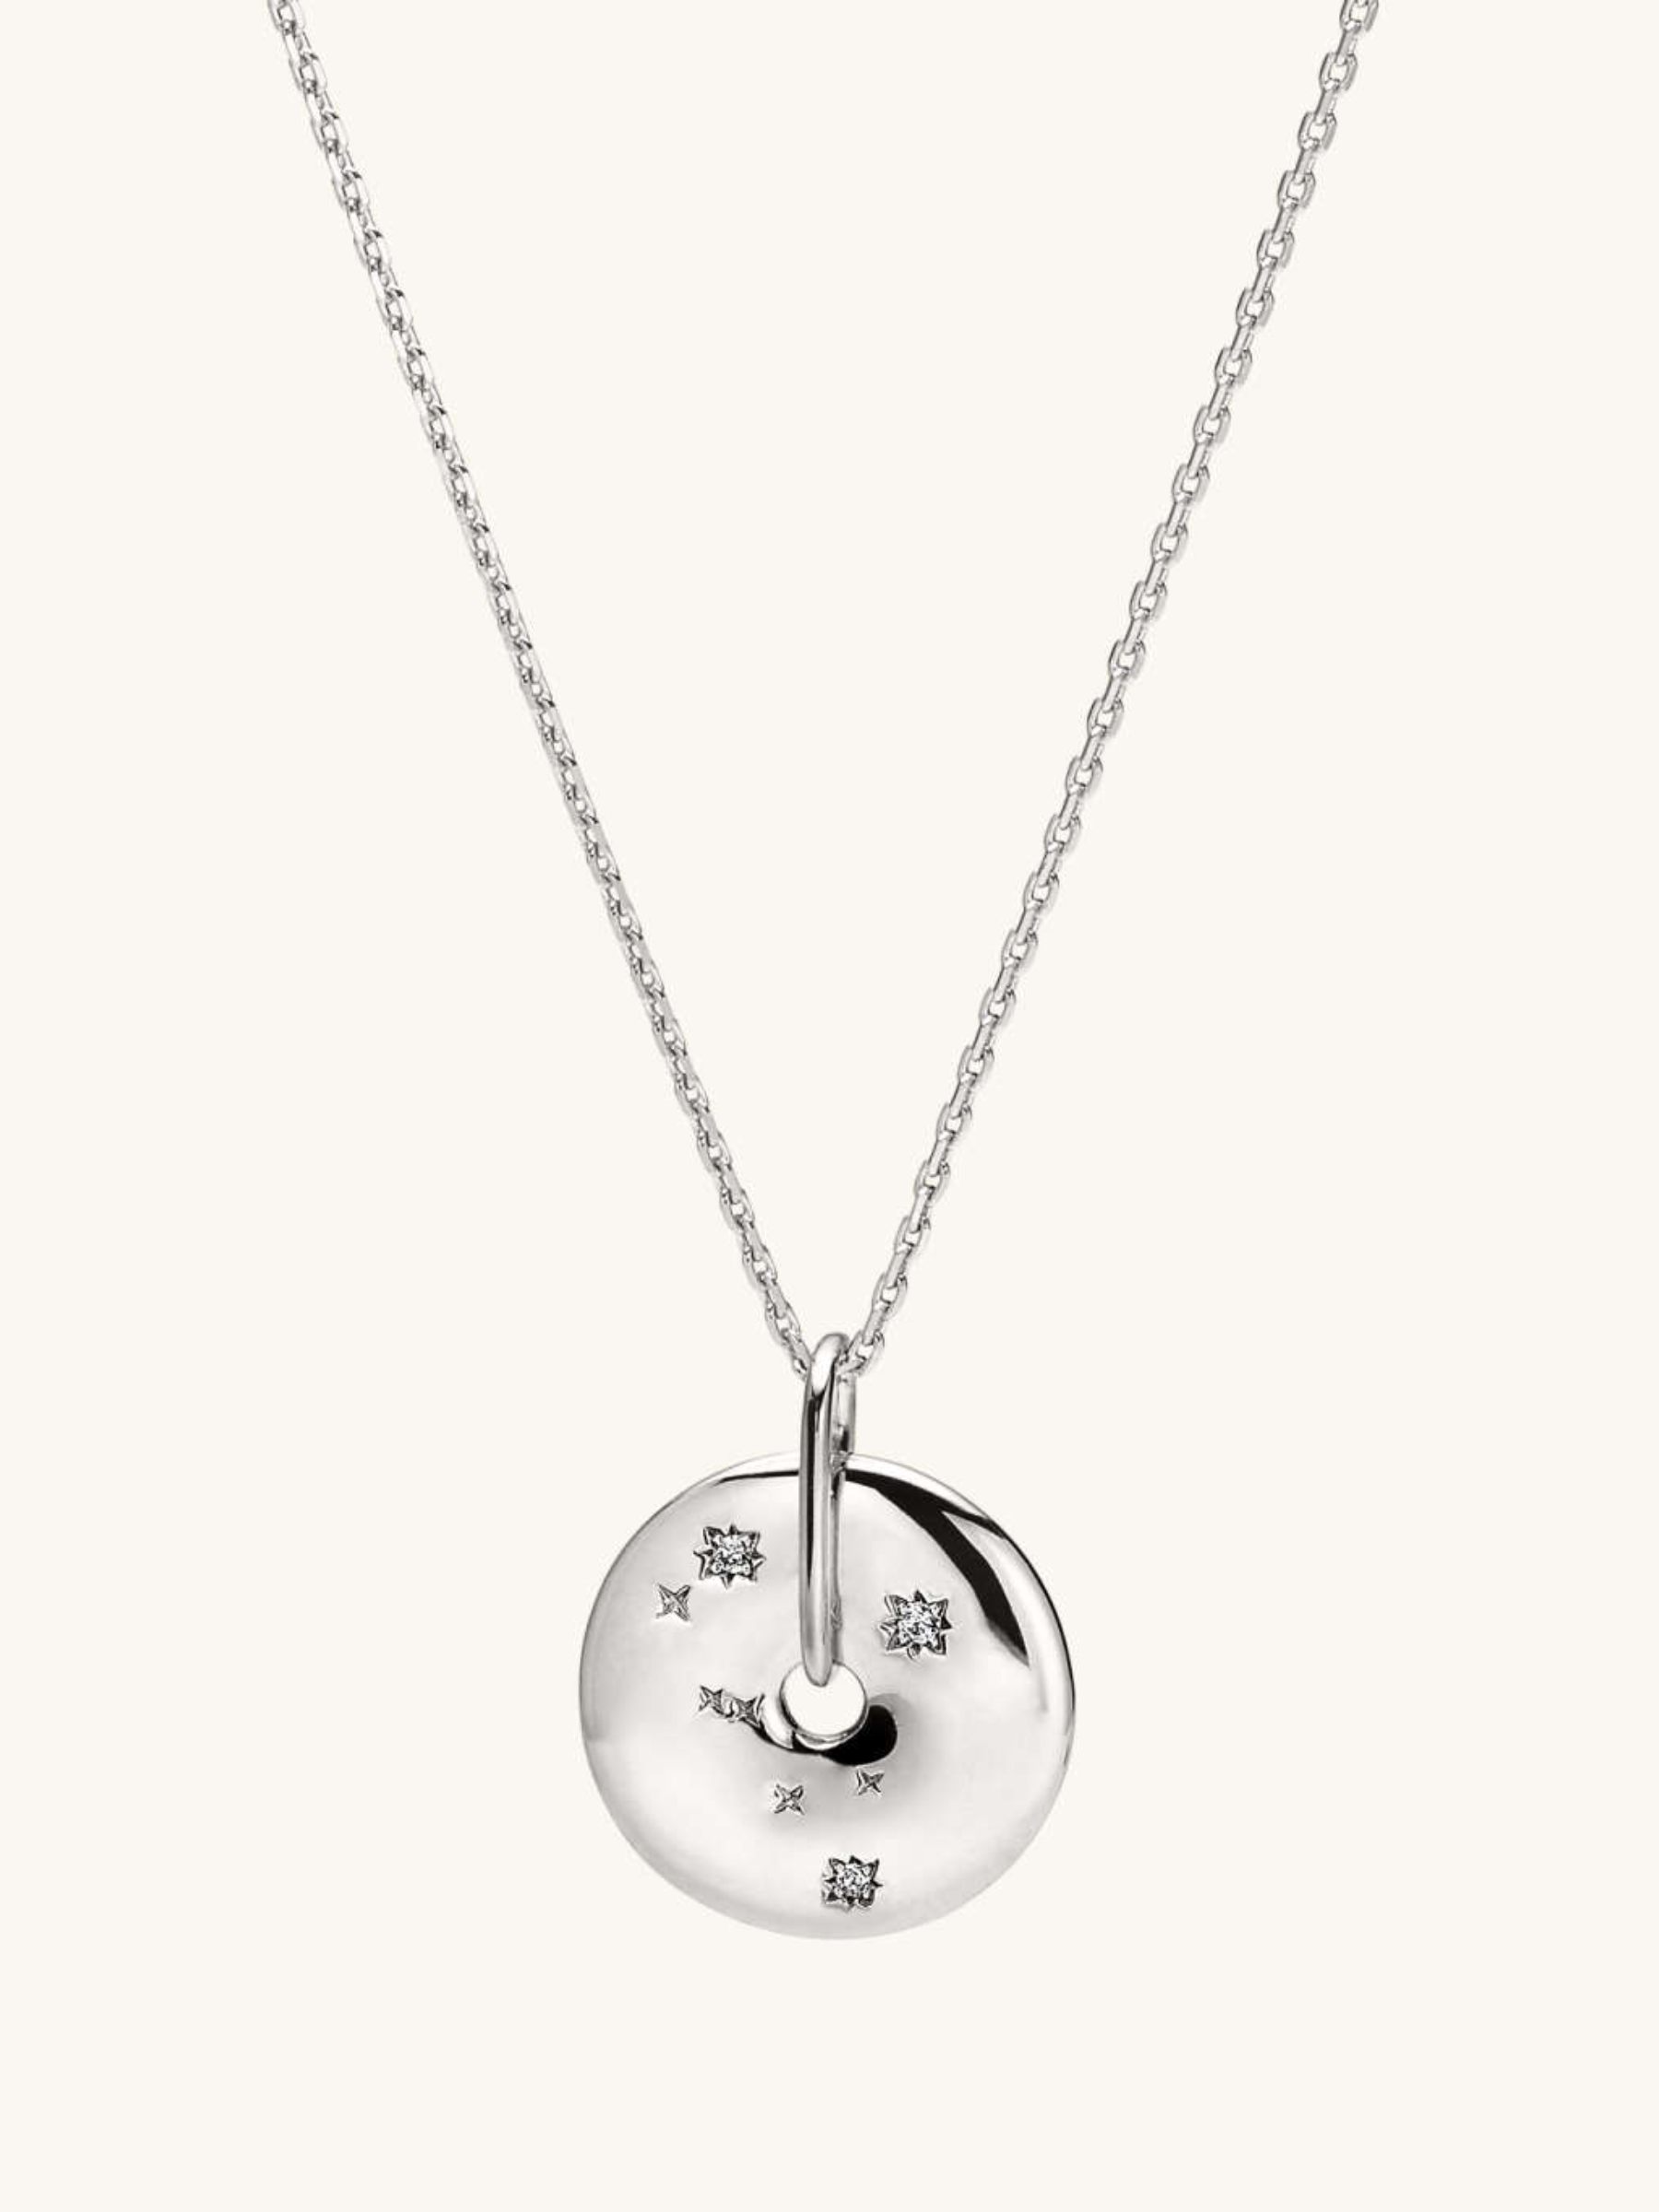 This understated accessory that features a constellation of their zodiac sign, accented with white sapphire gemstones. $98, Mujeri. <a href="https://mejuri.com/shop/products/zodiac-pendant-necklace-leo-silver">Get it now!</a><p>Sign up for today’s biggest stories, from pop culture to politics.</p><a href="https://www.glamour.com/newsletter/news?sourceCode=msnsend">Sign Up</a>